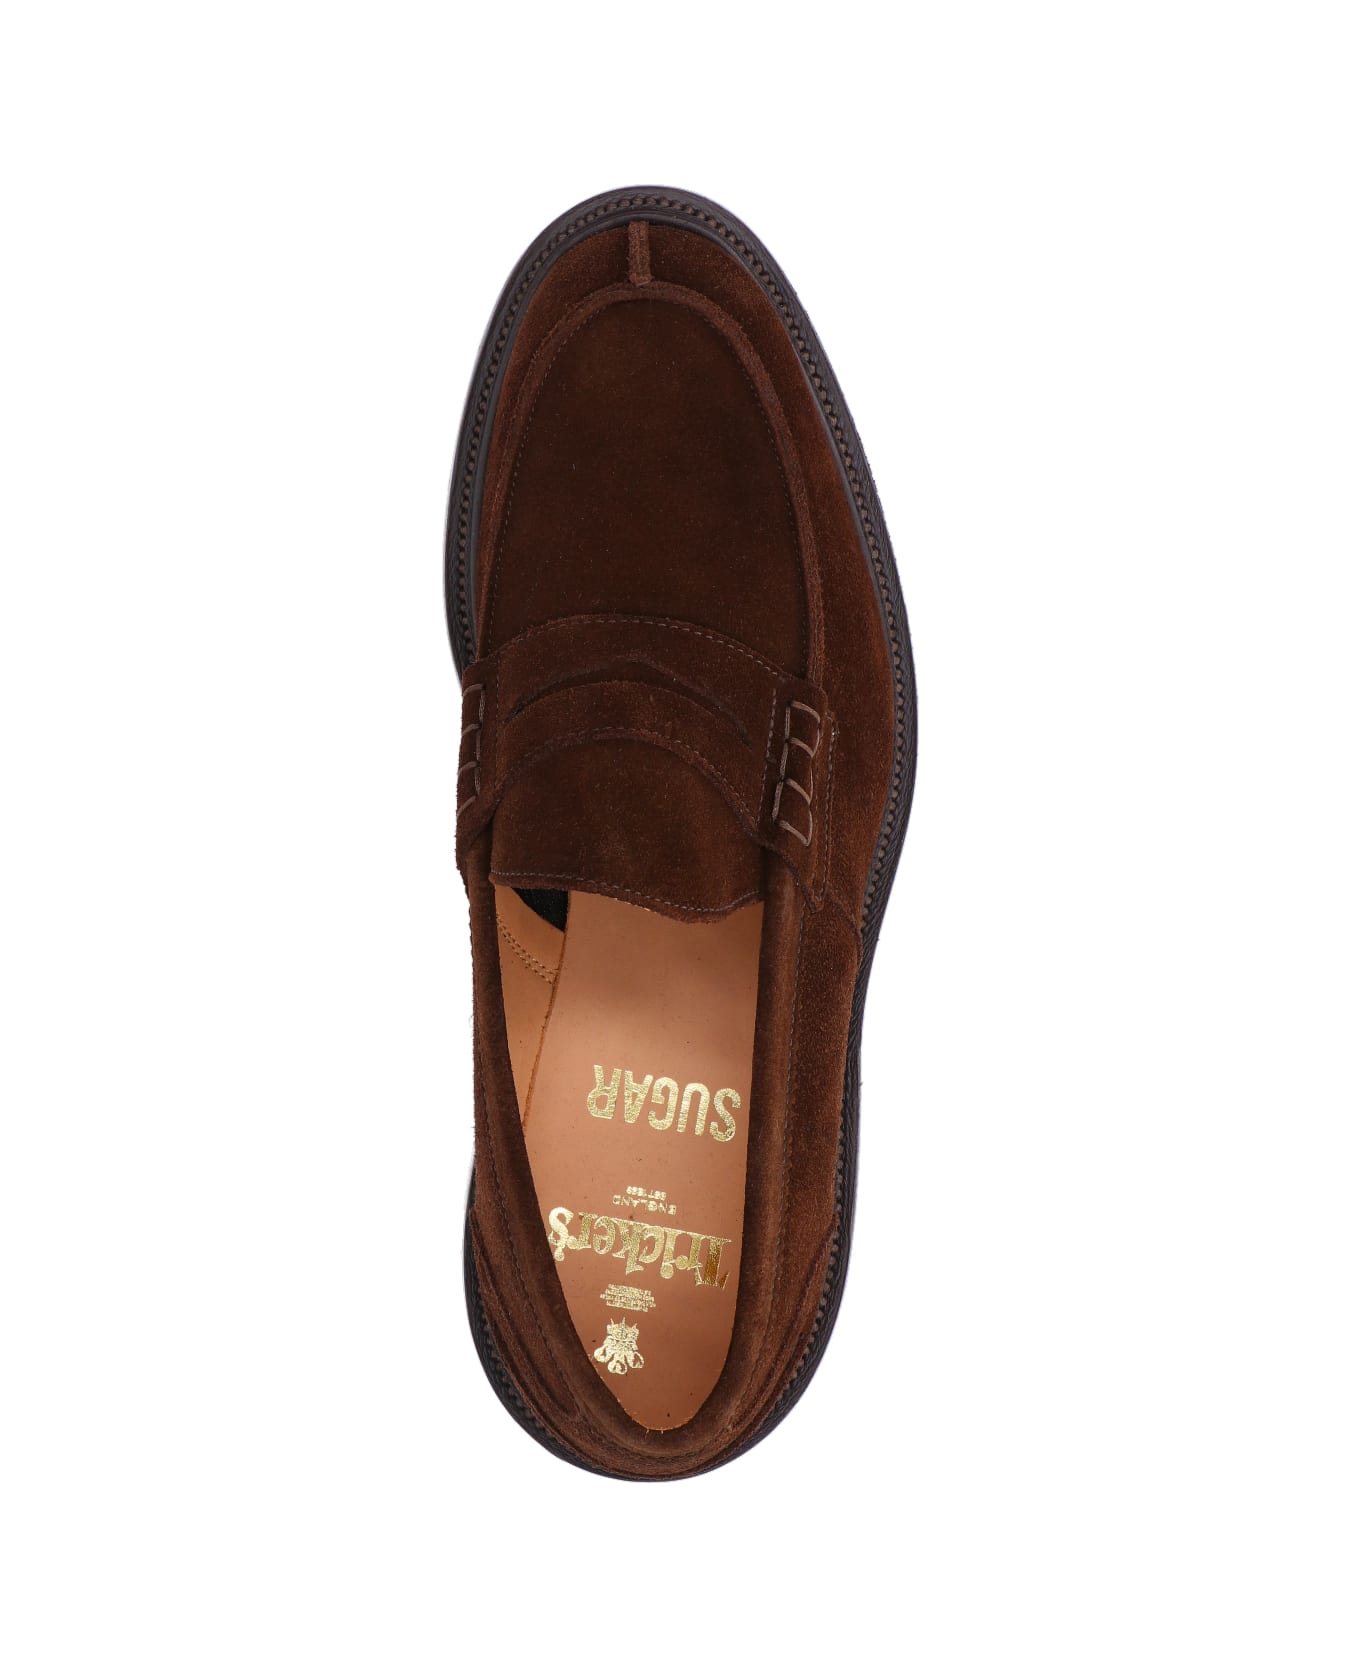 Tricker's 'james Penny' Loafers - Brown ローファー＆デッキシューズ